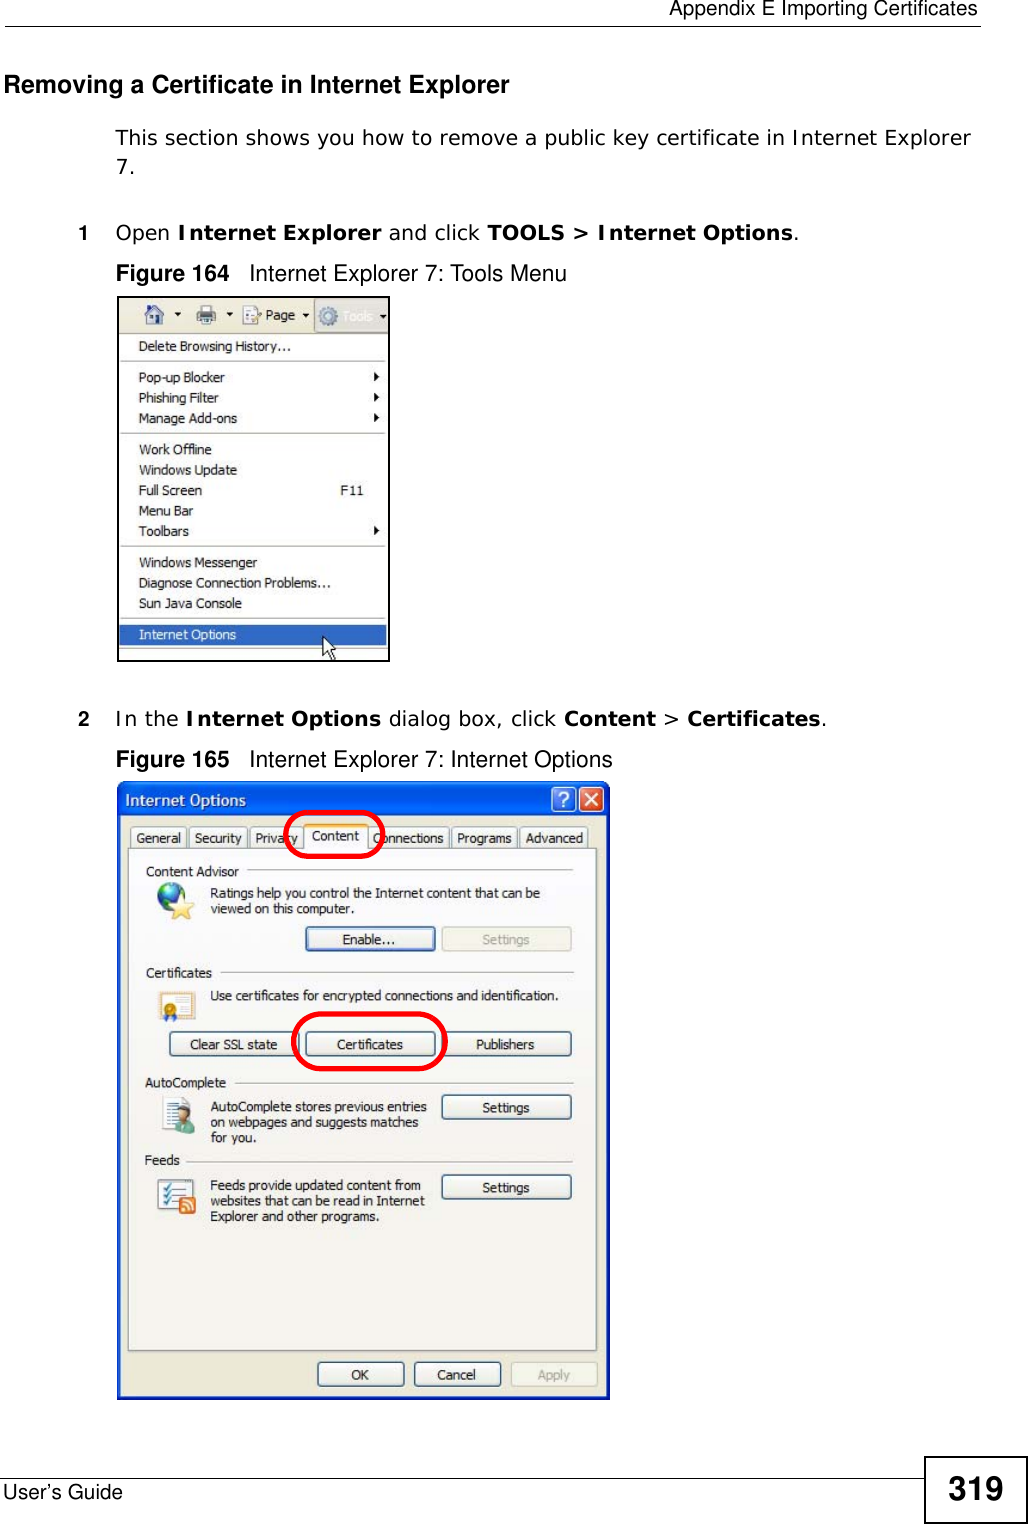  Appendix E Importing CertificatesUser’s Guide 319Removing a Certificate in Internet ExplorerThis section shows you how to remove a public key certificate in Internet Explorer 7.1Open Internet Explorer and click TOOLS &gt; Internet Options.Figure 164   Internet Explorer 7: Tools Menu2In the Internet Options dialog box, click Content &gt; Certificates.Figure 165   Internet Explorer 7: Internet Options